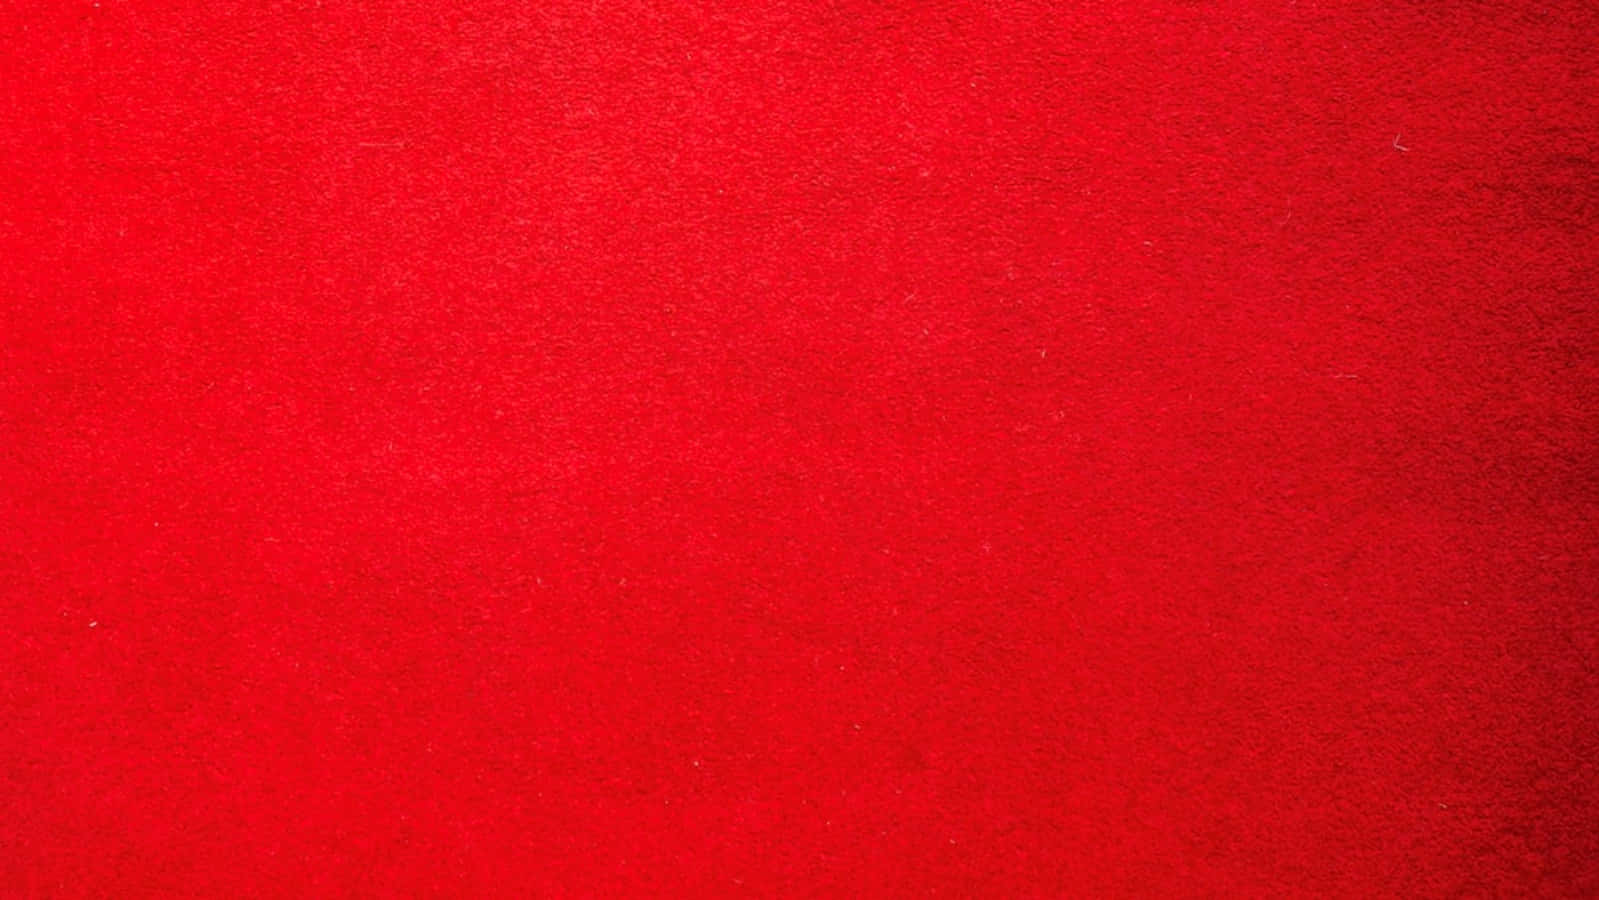 Red Texture Plain Bright Red Background Picture